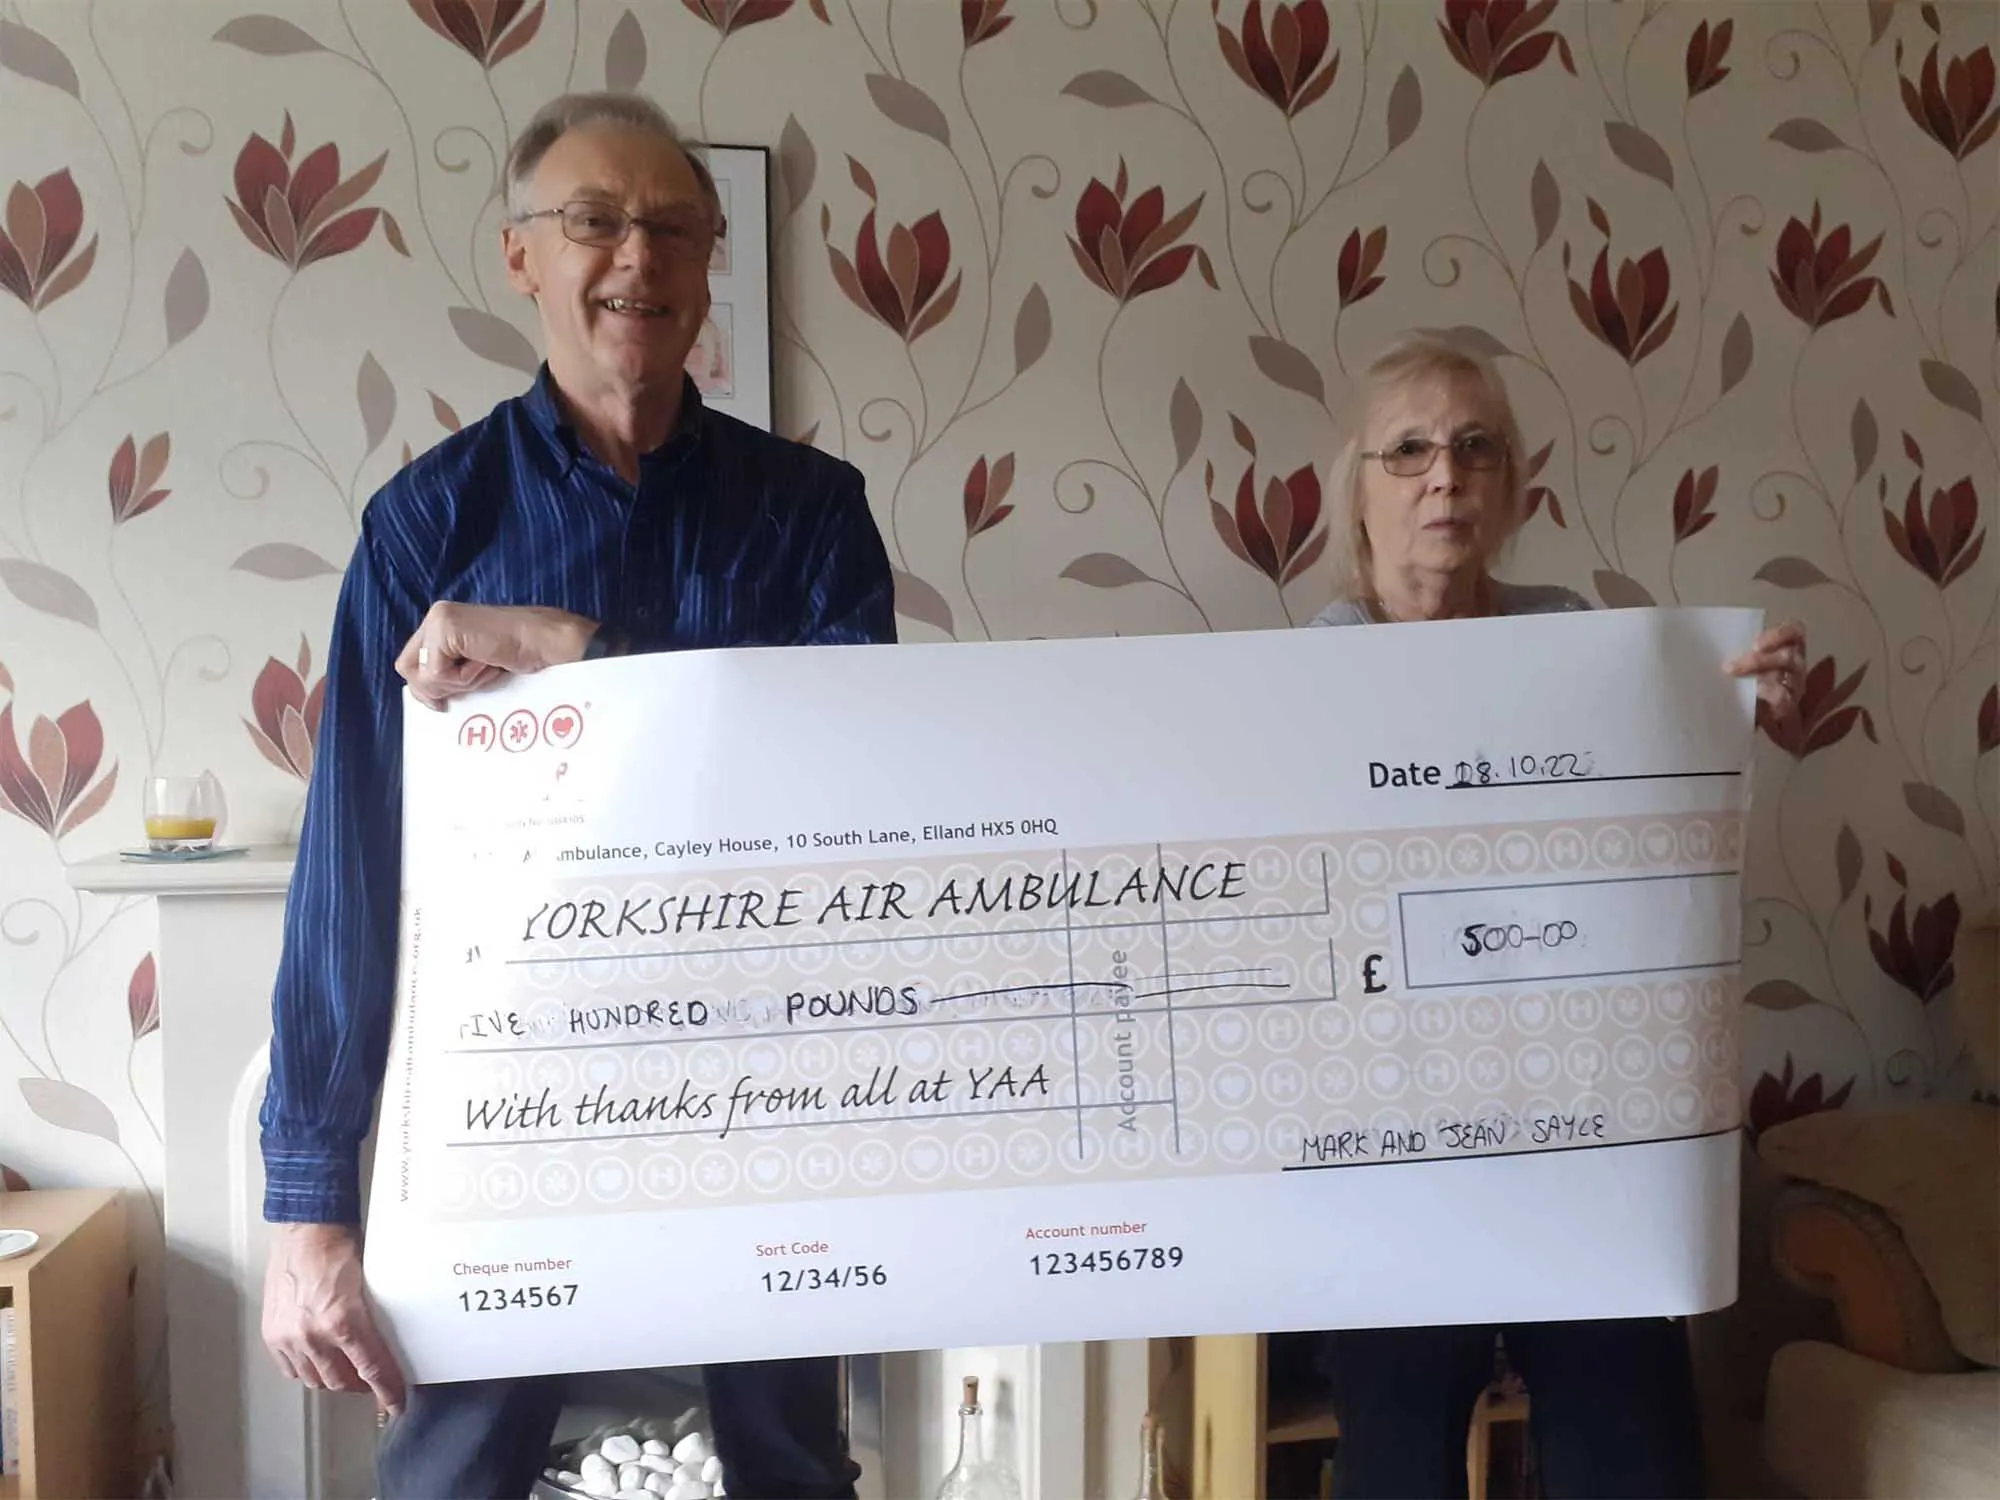 Mark and Jean Sayle are holding a giant cheque. The cheque is made payable to Yorkshire Air Ambulance and is for five hundred pounds. They are stood in front of a wall covered with flowered wall paper.